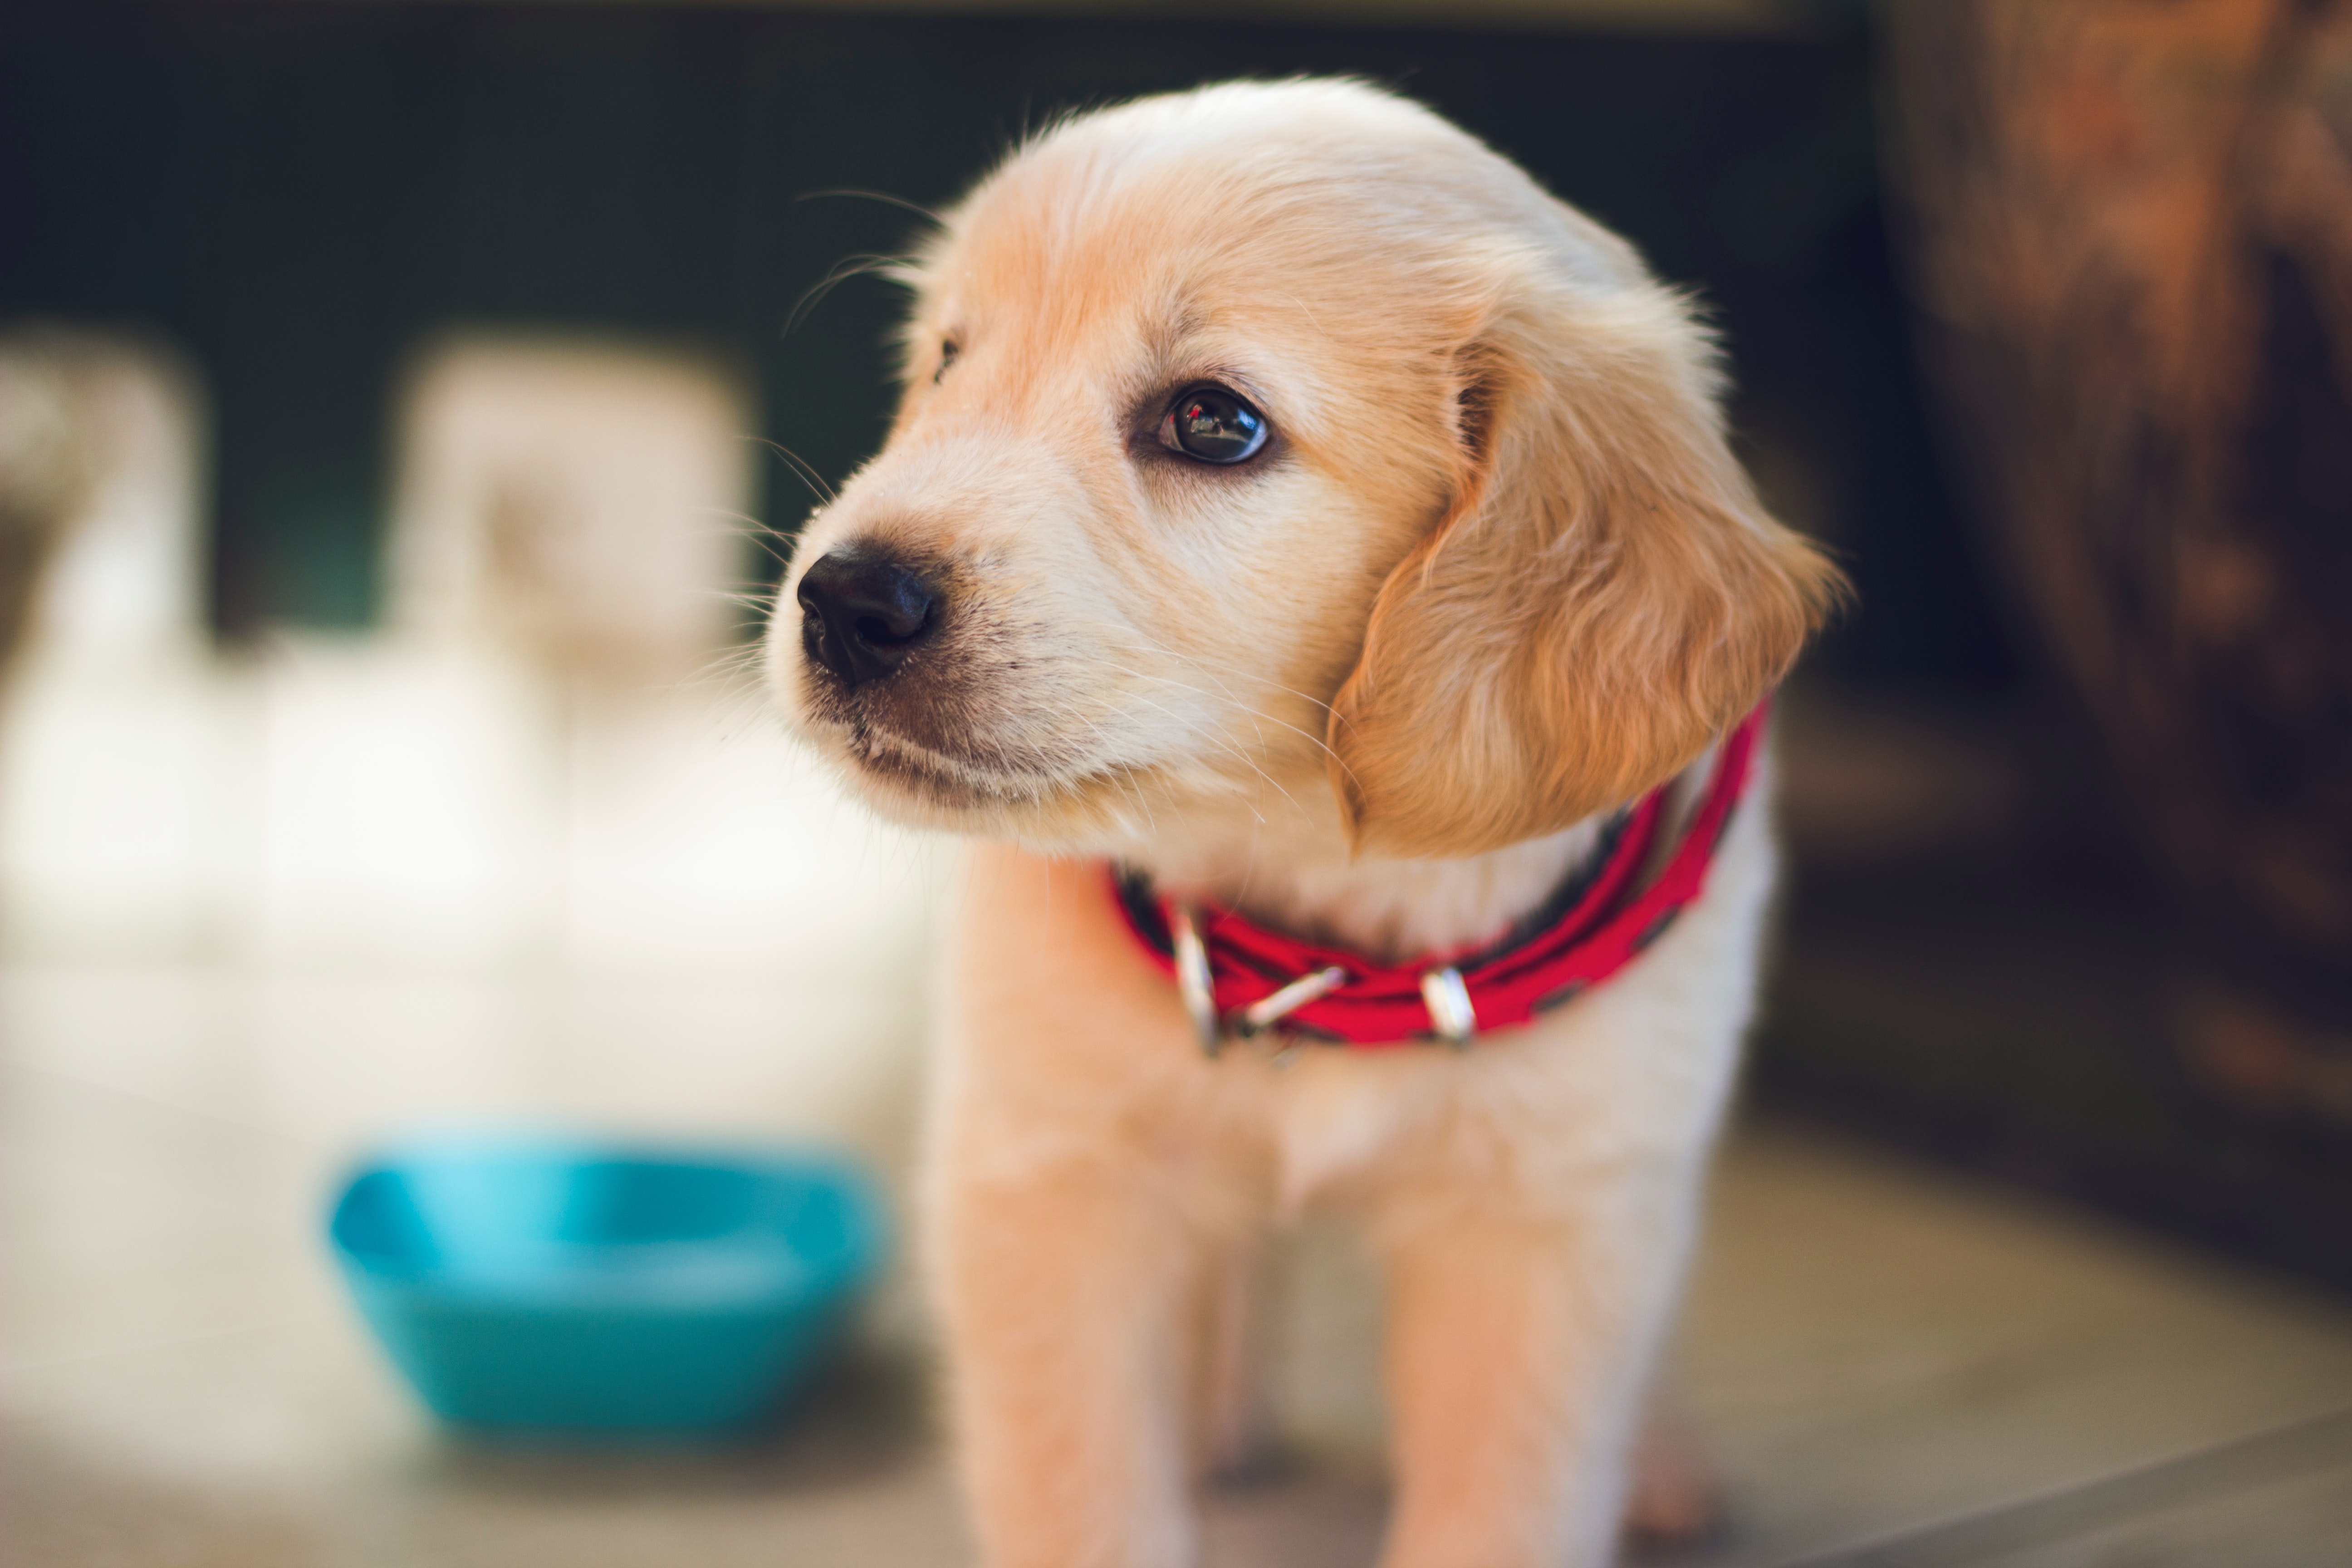 a puppy standing next to a dog food bowl